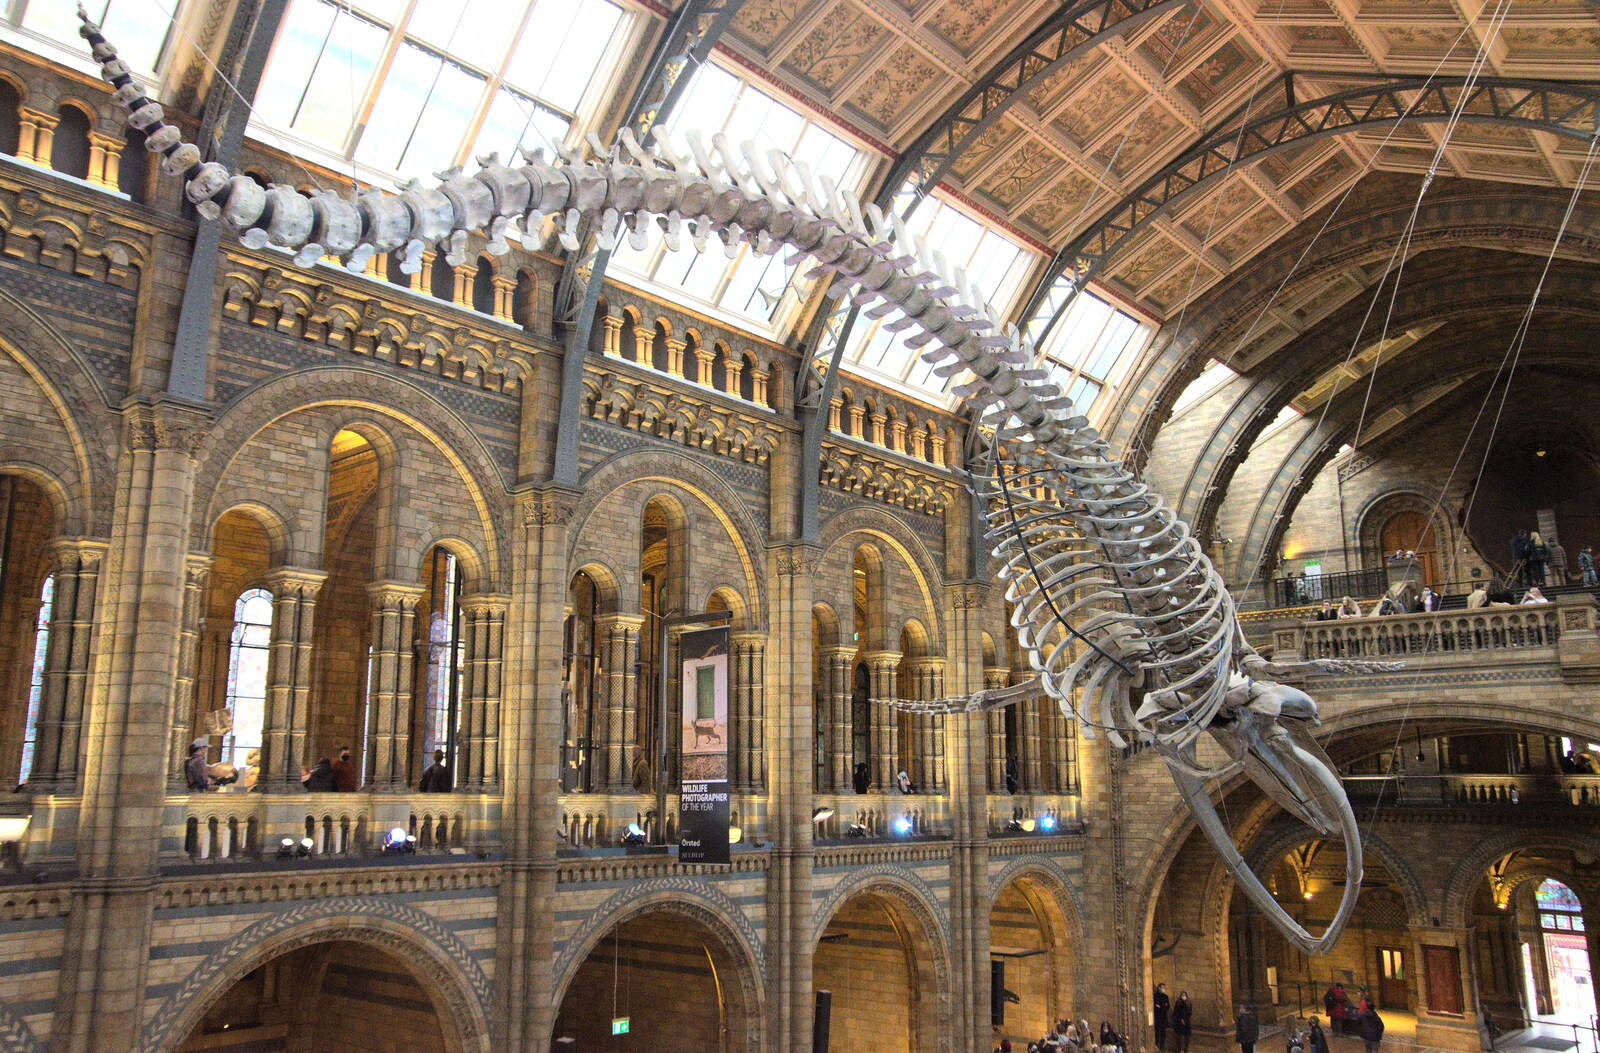 A view of the rear of the blue whal skeleton from A Trip to the Natural History Museum, Kensington, London - 15th January 2022